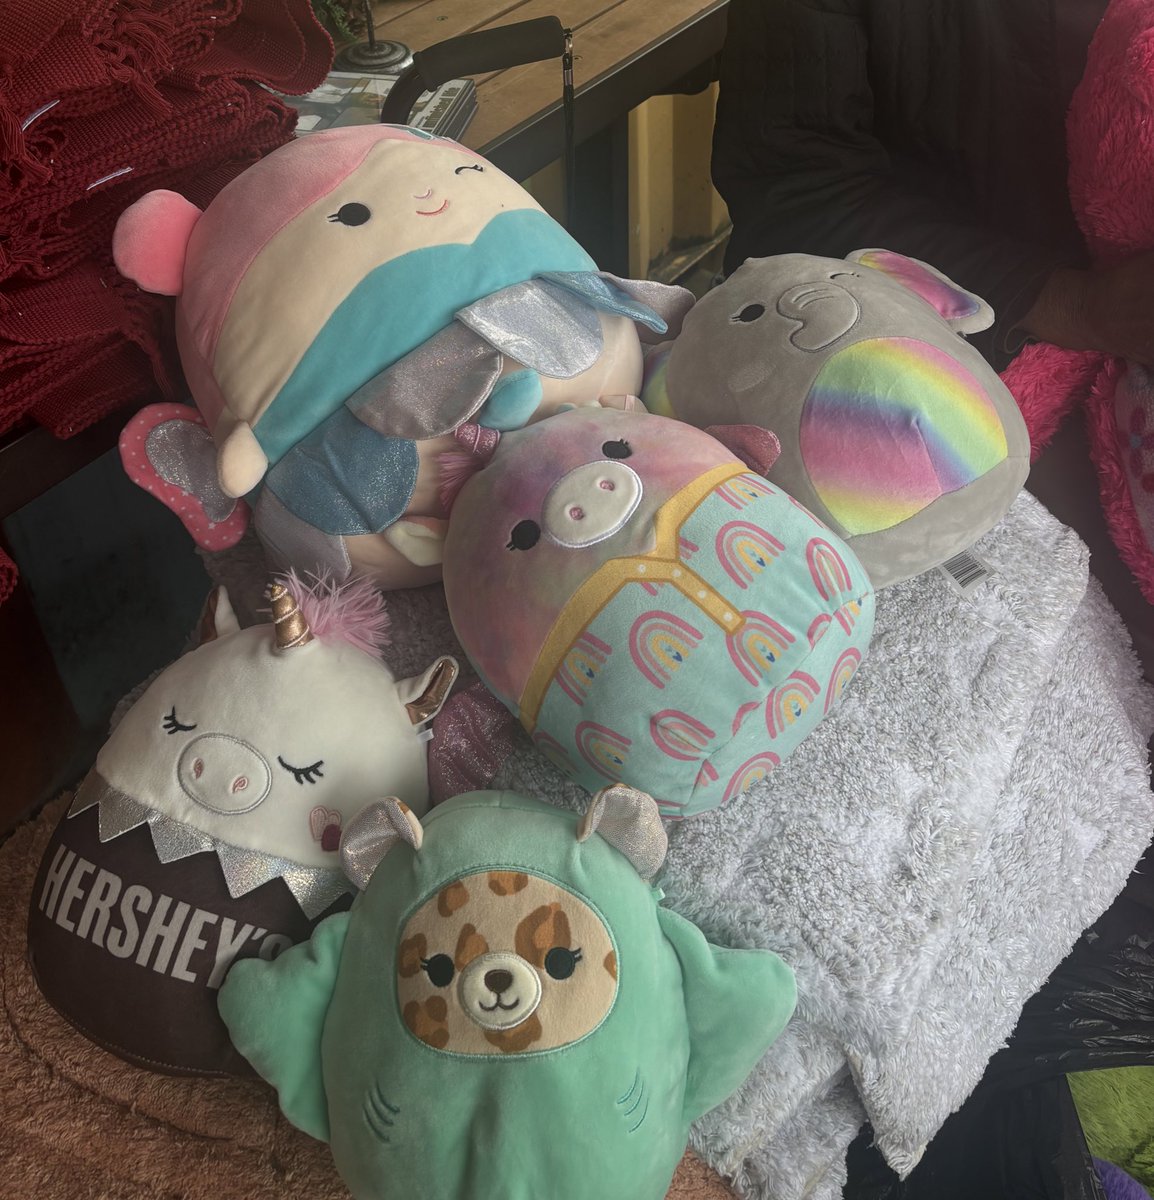 We love that someone outgrew their squishmallow collection because it made so many babies happy today!! #sharing